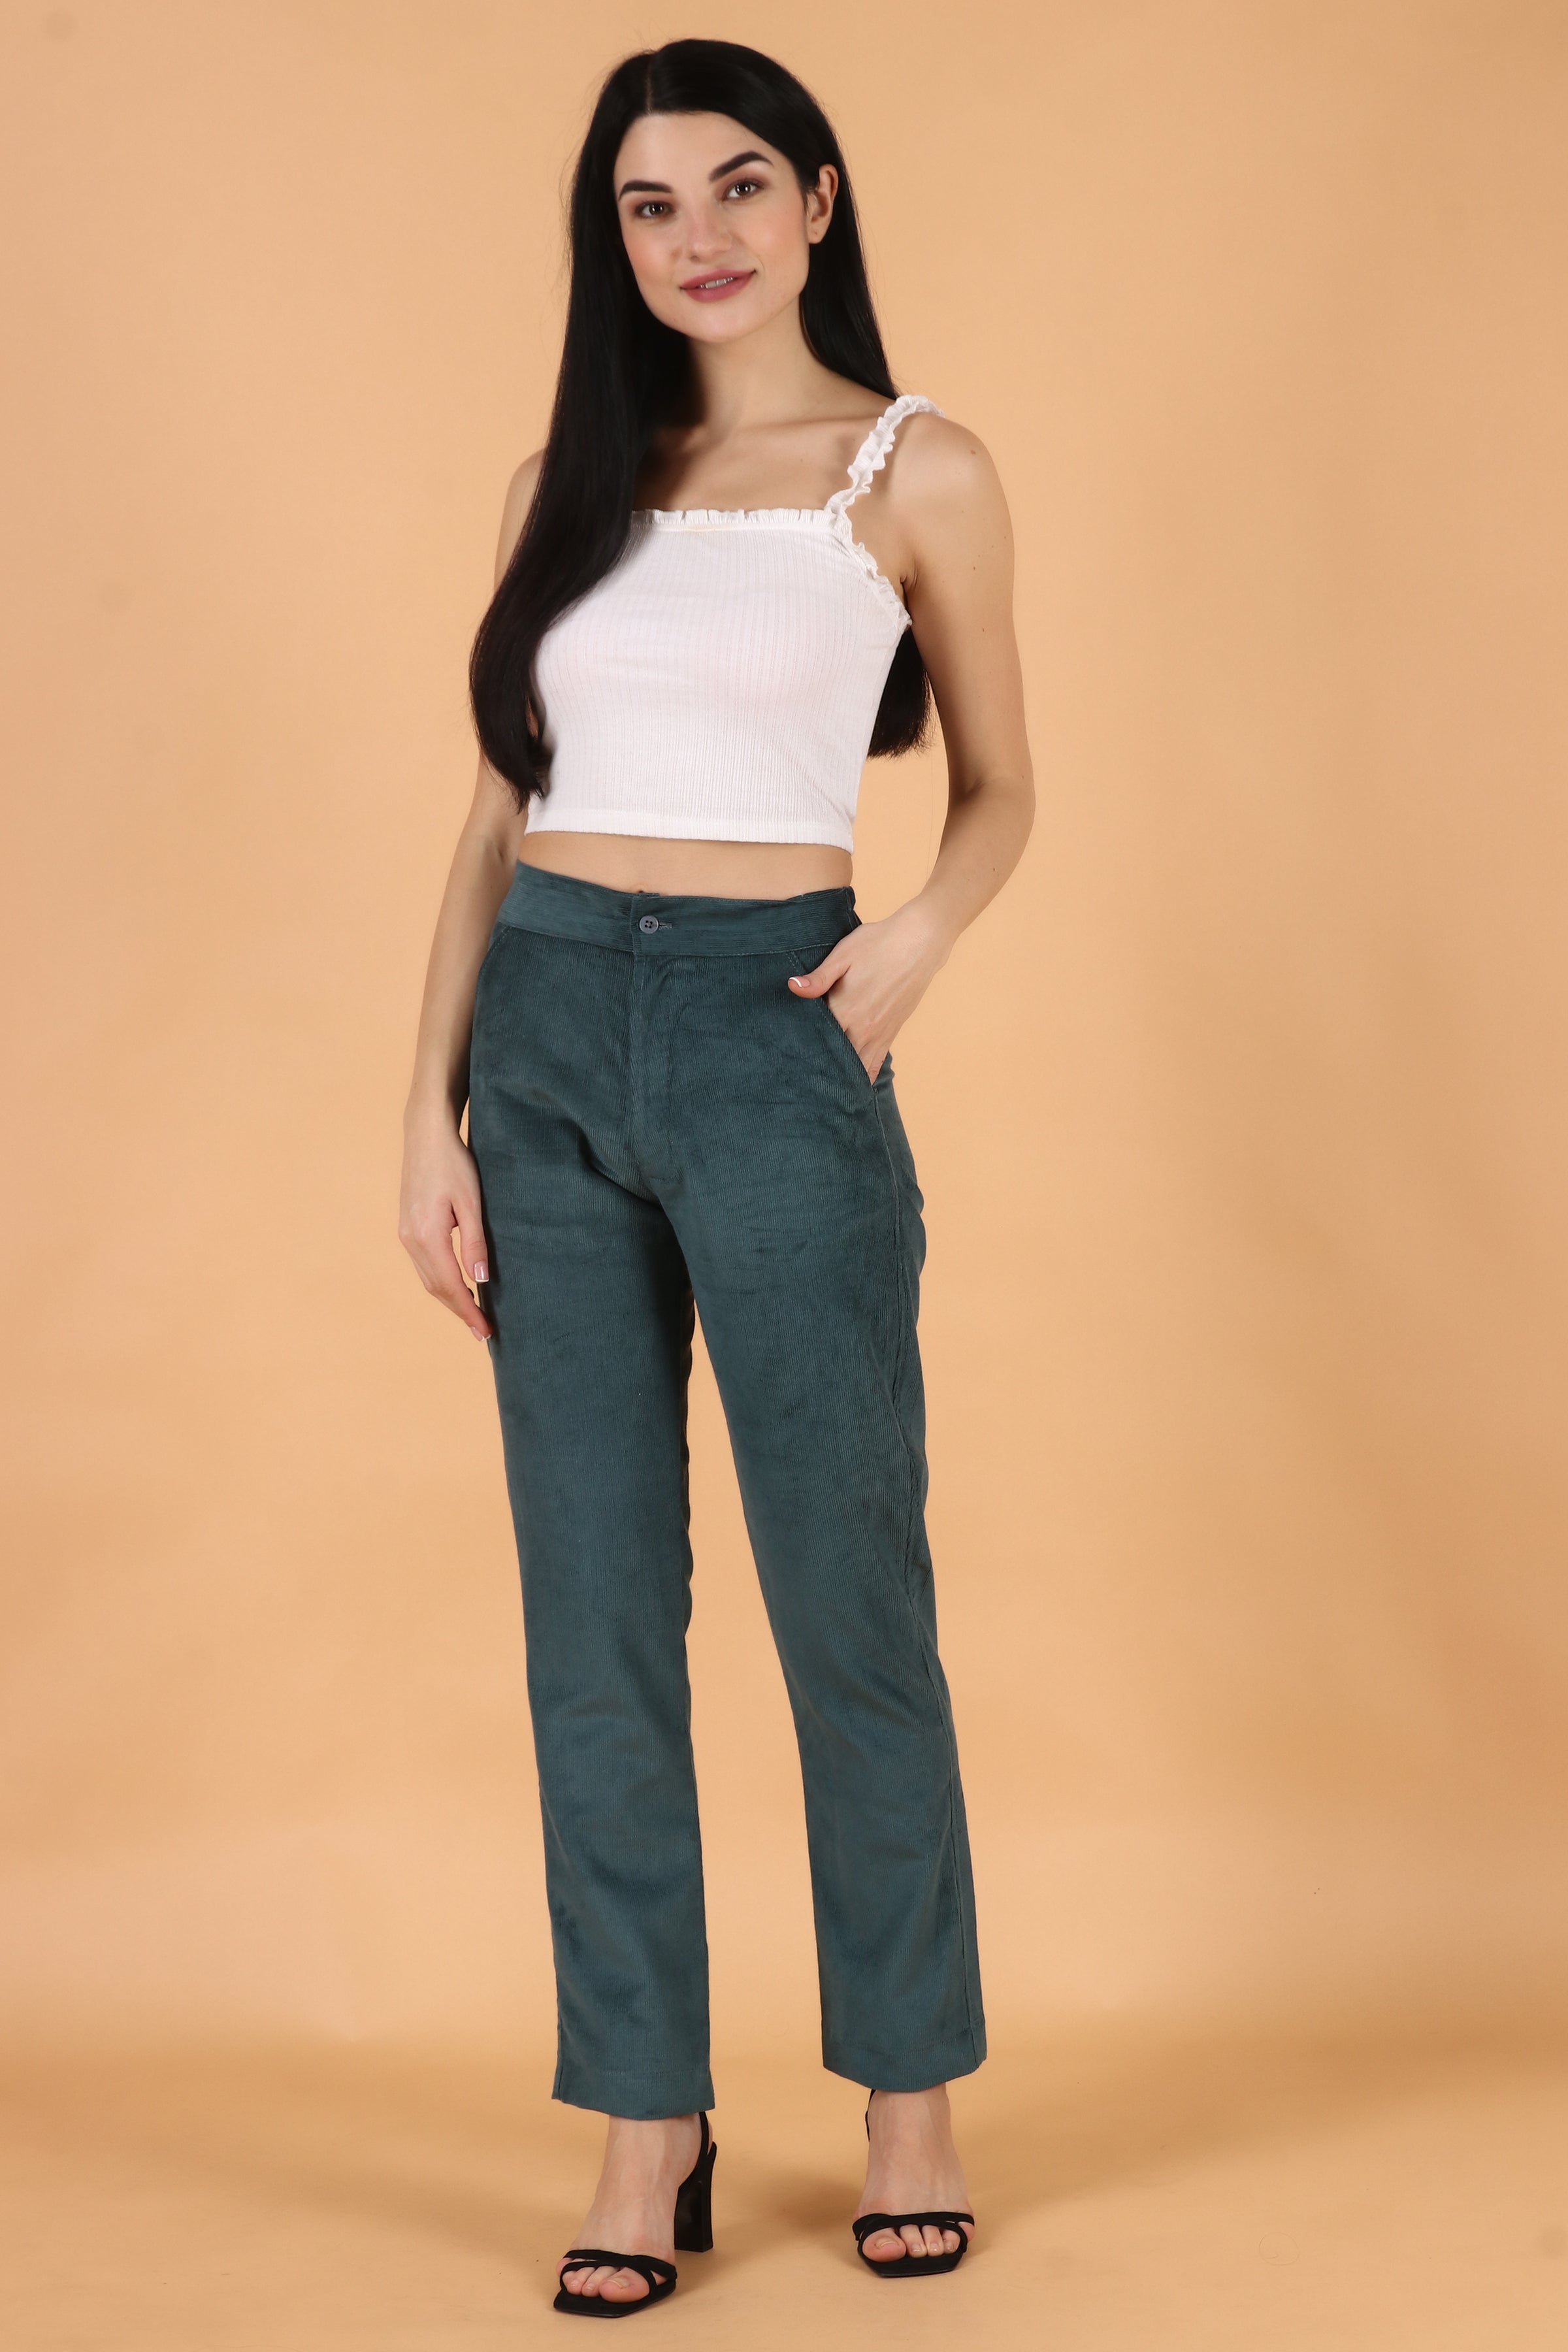 Chloé Wide & Flare Pants for Kids sale - discounted price | FASHIOLA INDIA